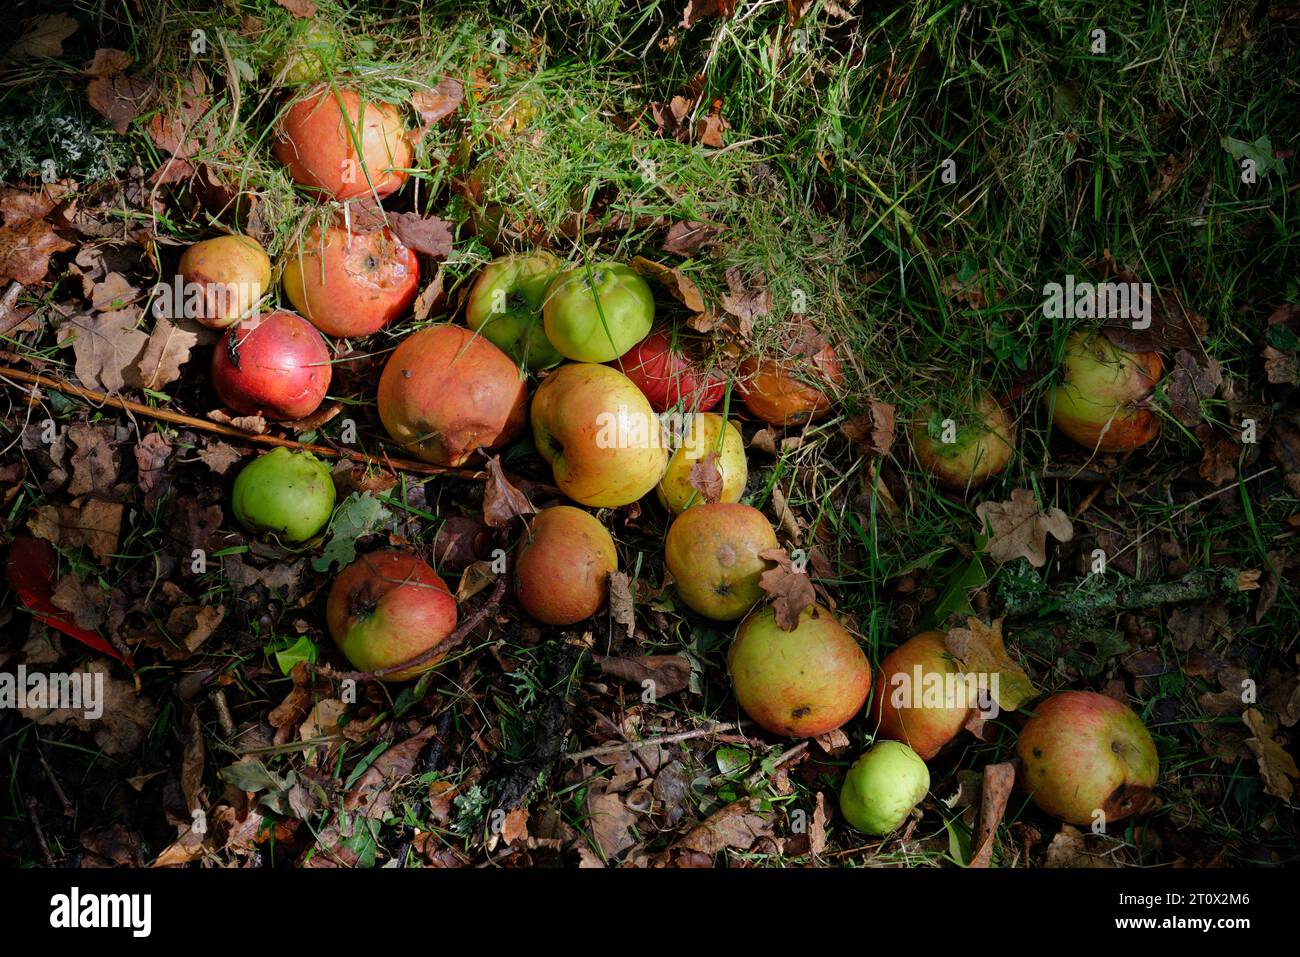 Fallen apples off a tree in early autumn. Some rotting, some bruised. Stock Photo